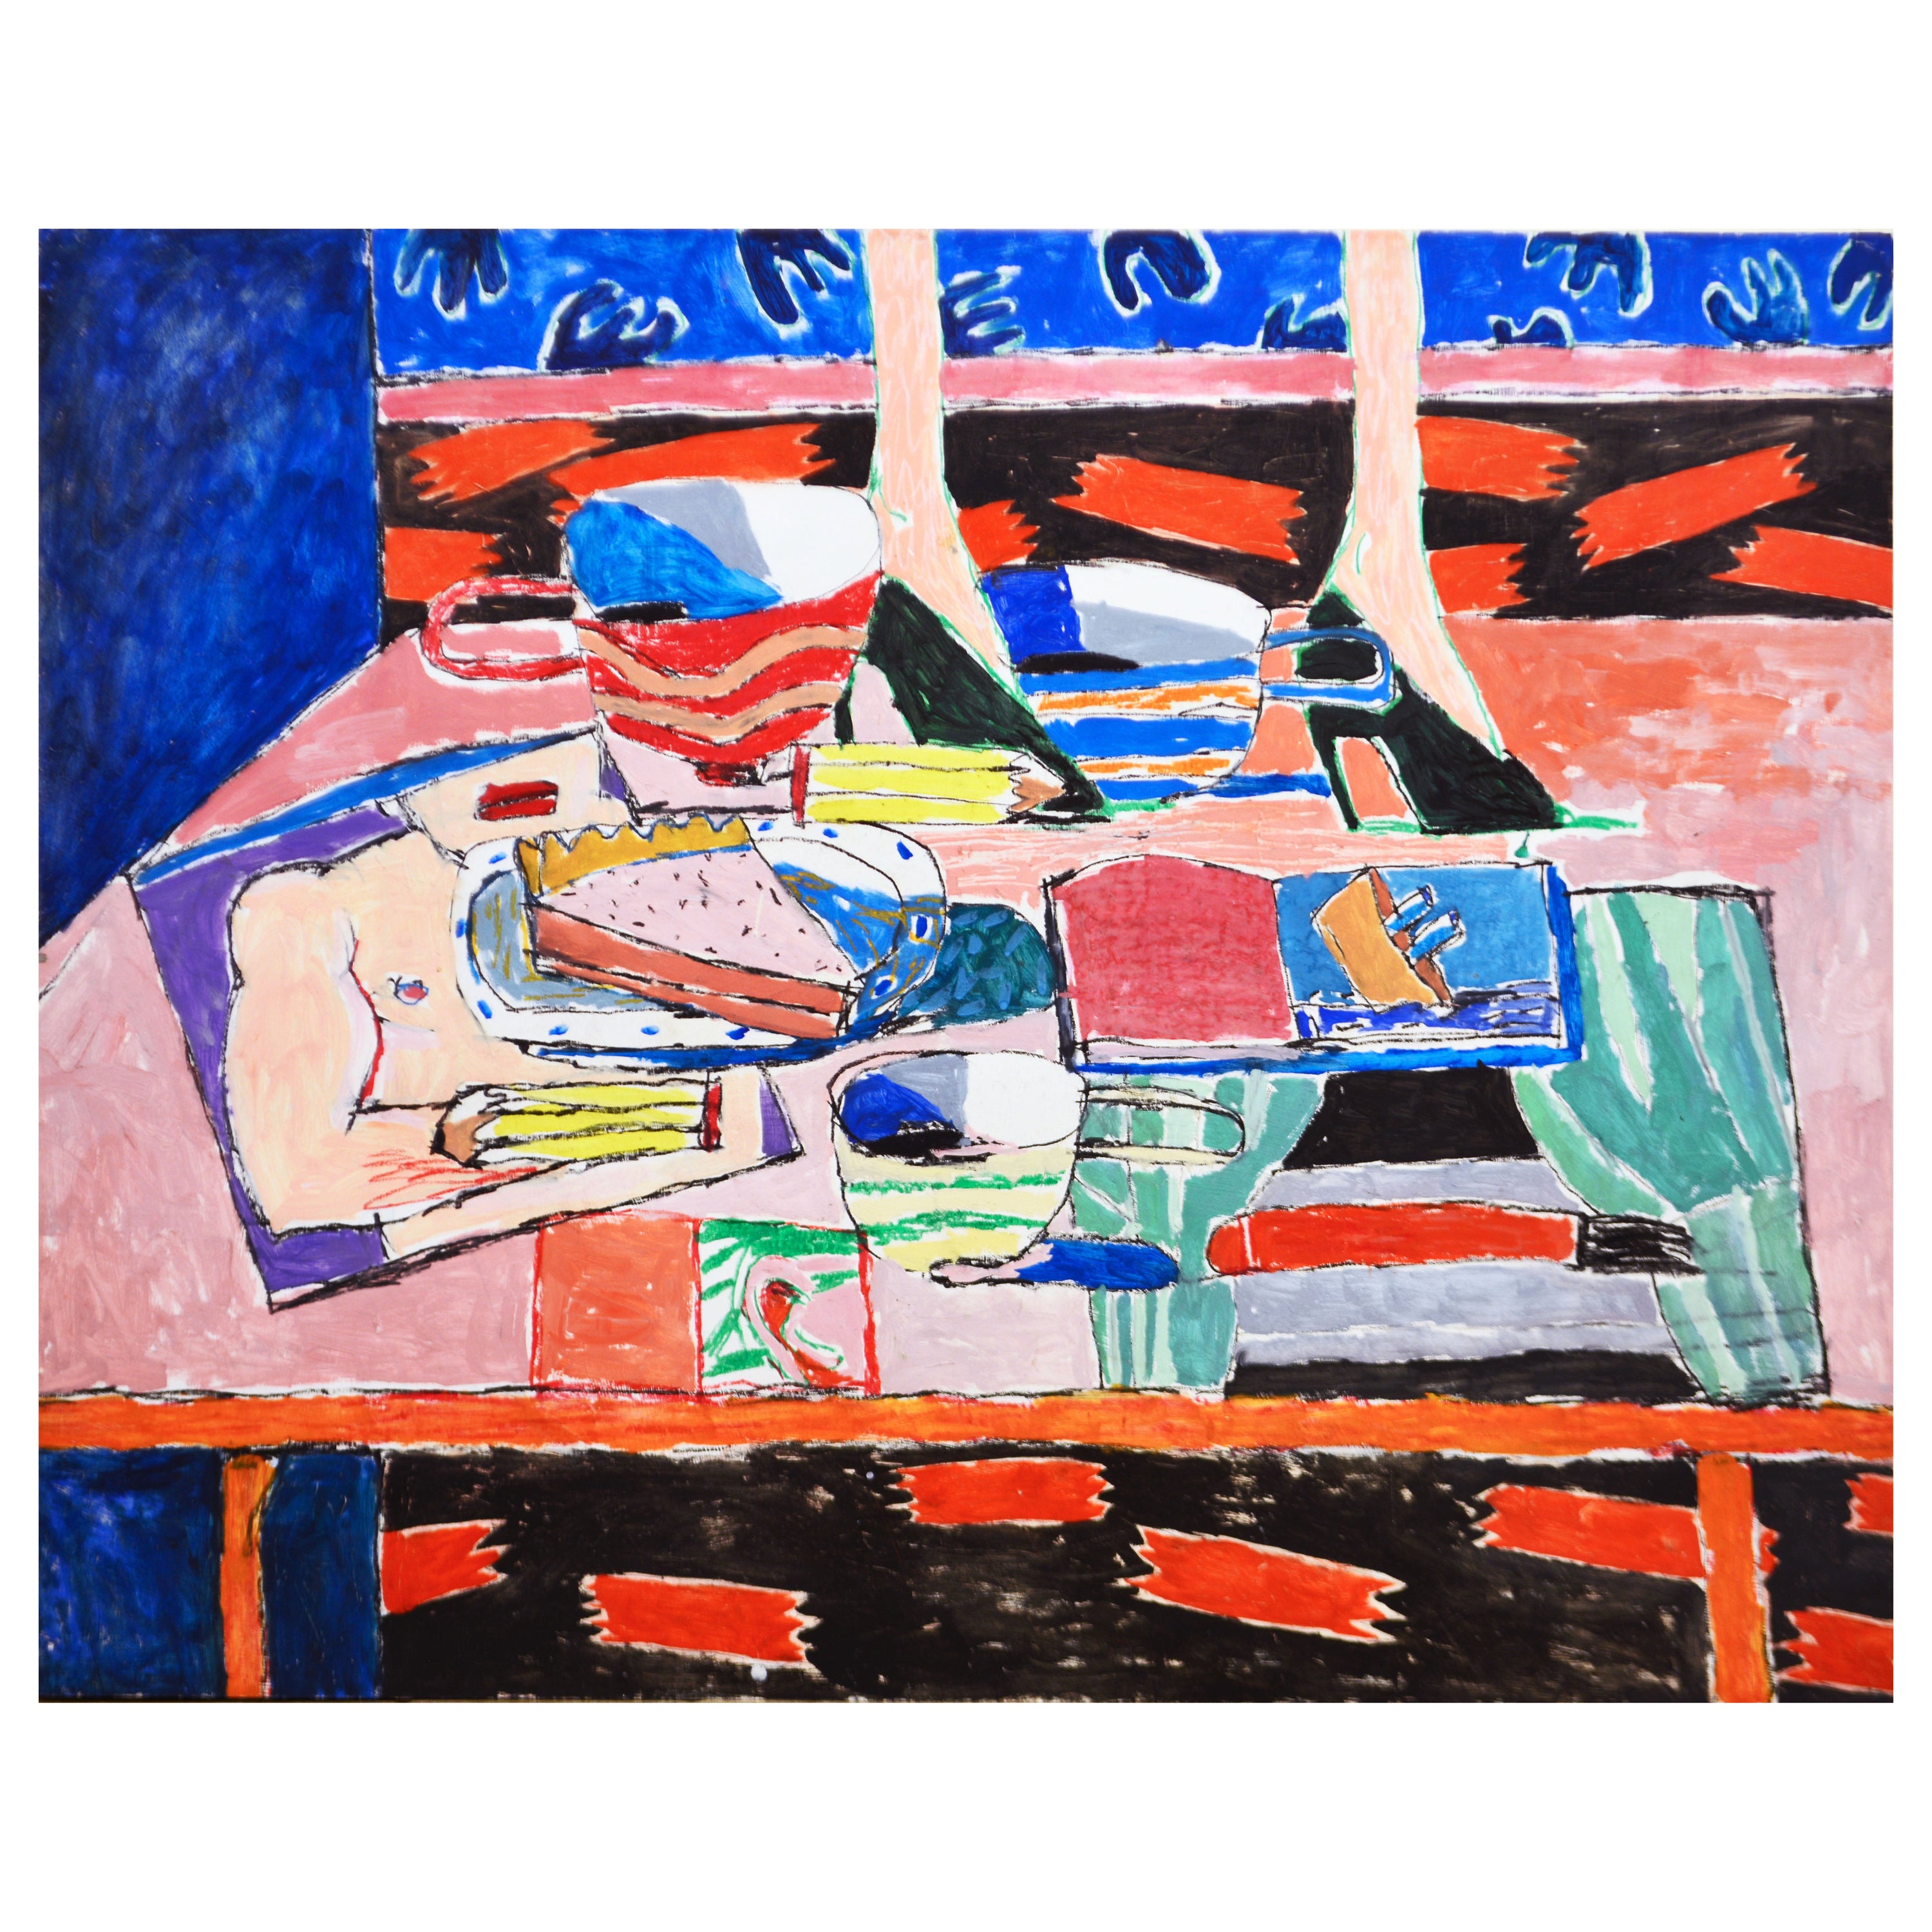 Fauve Matisse Inspired Painting, TheArtist's Desk, with Catching Artsy Narrative